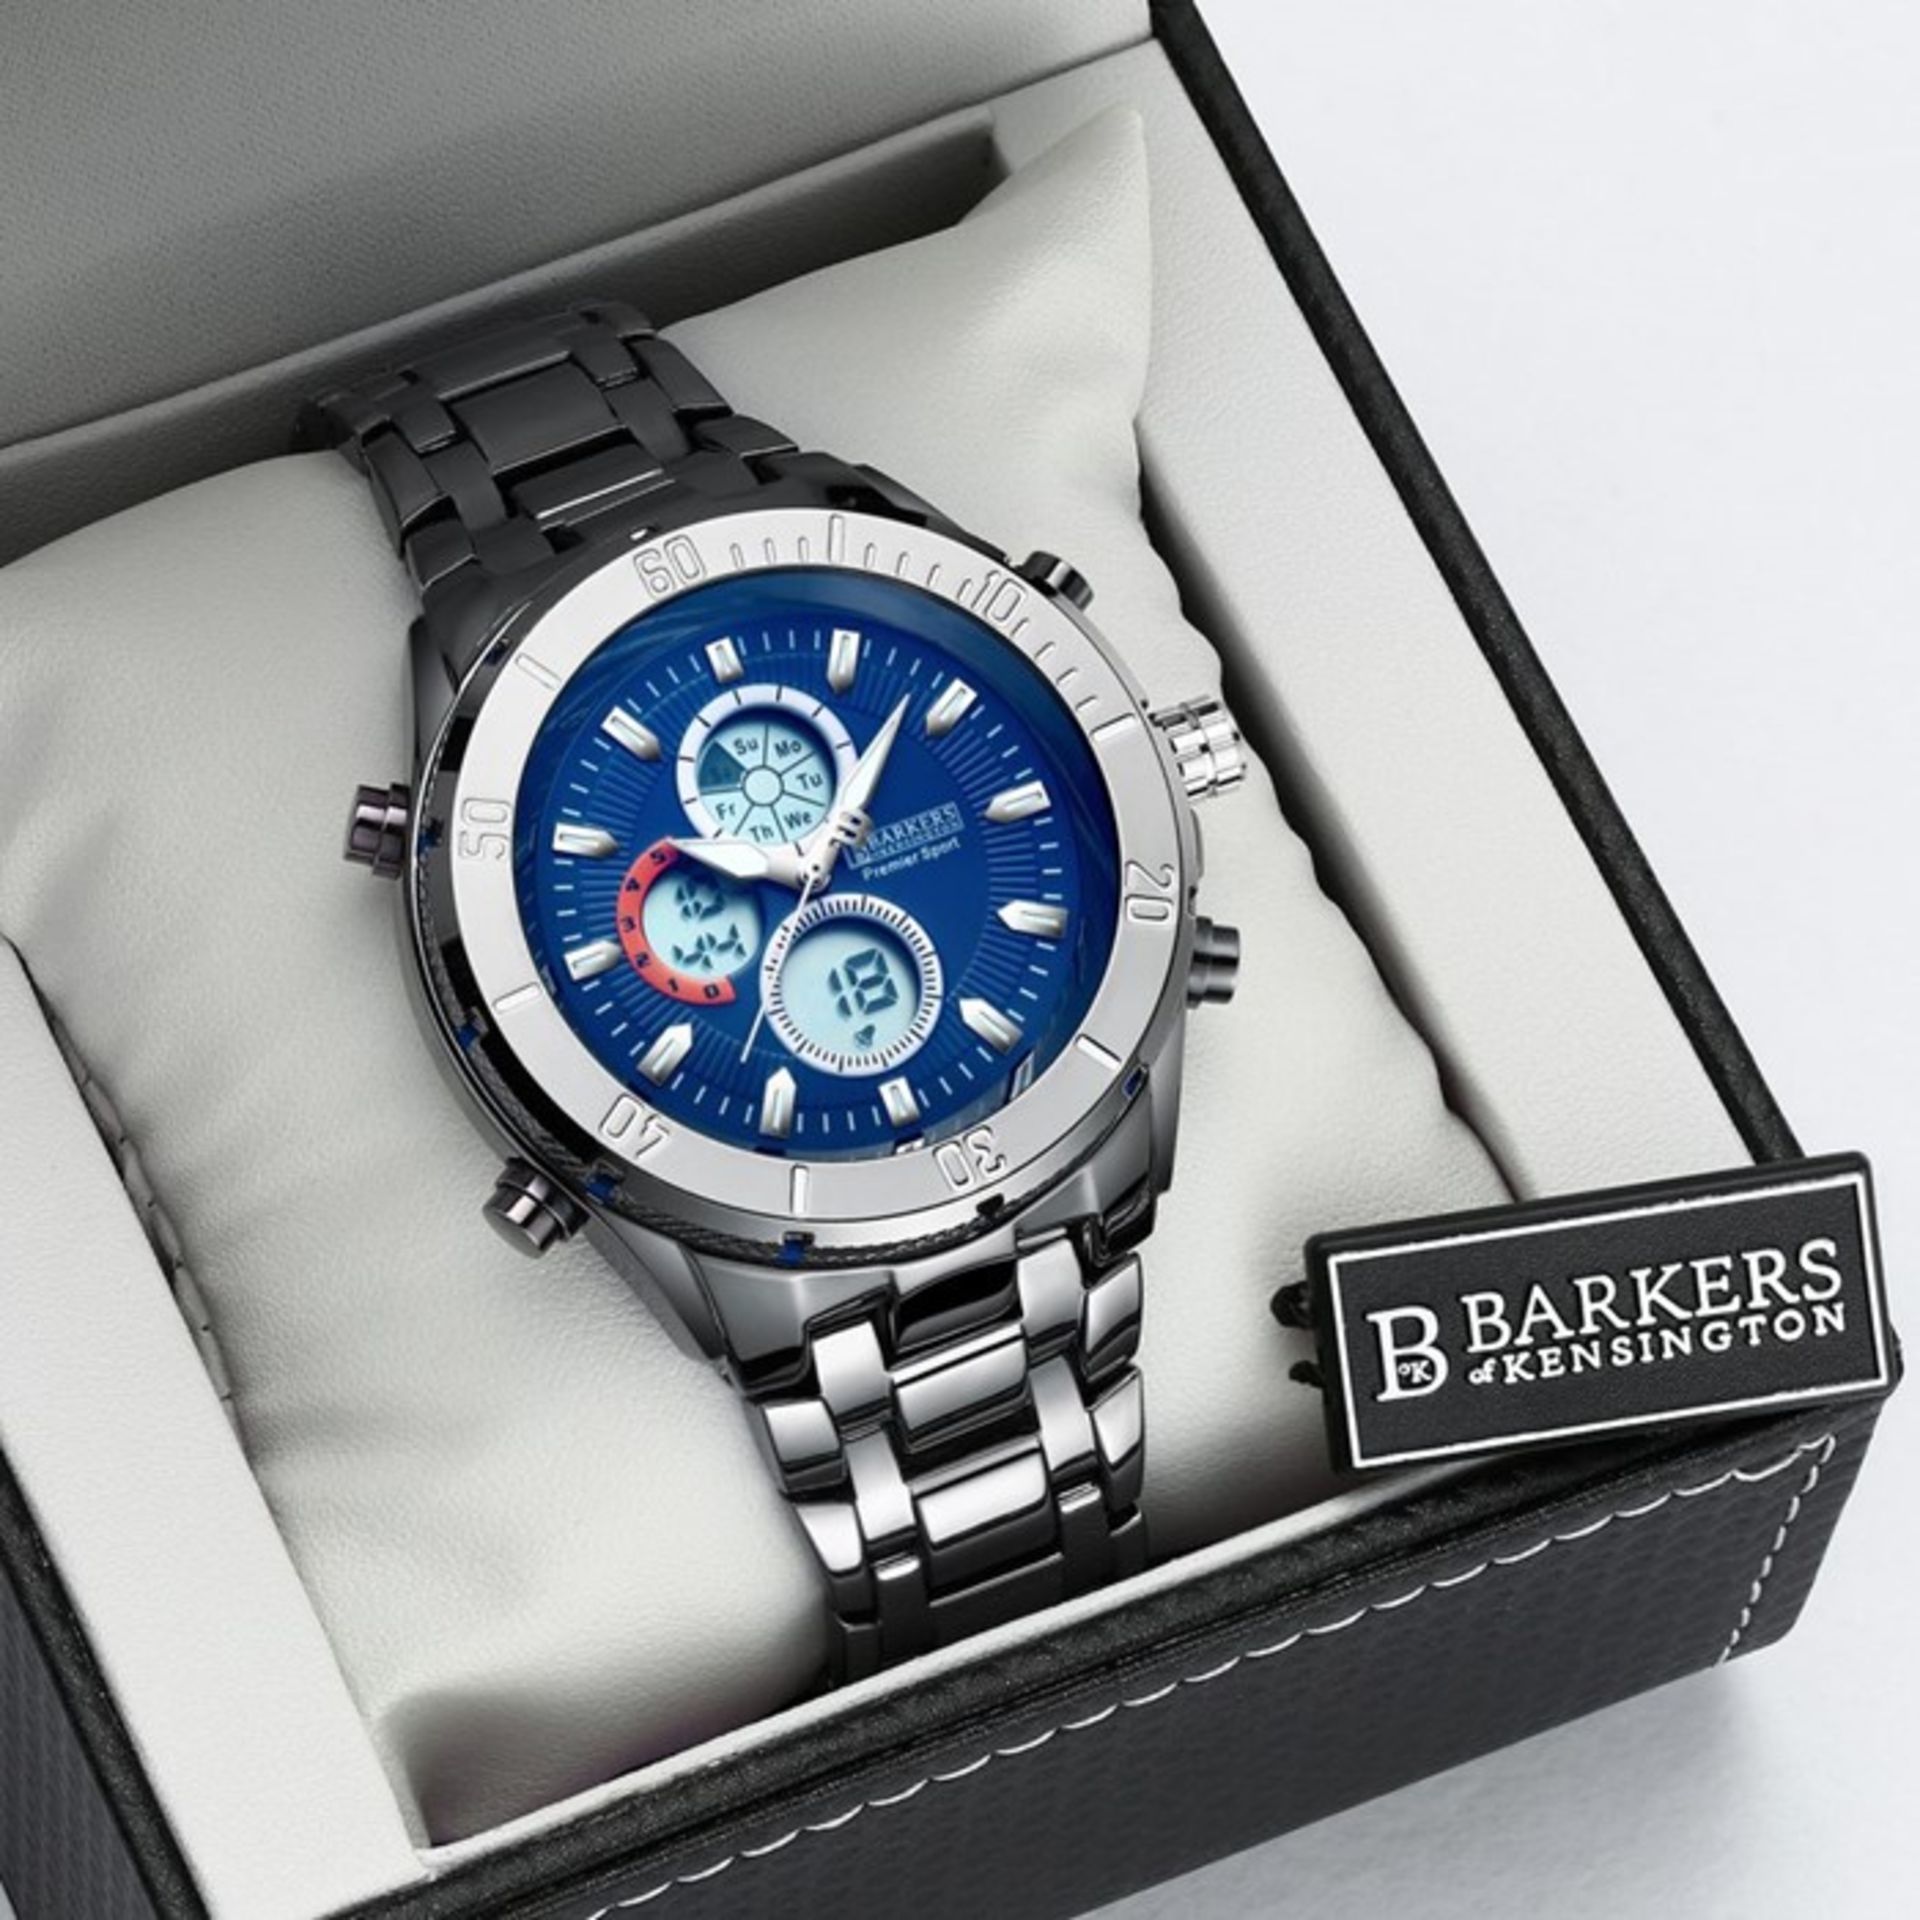 1 BRAND NEW BOXED BARKERS OF KENSINGTON PREMIER SPORT IN BLUE / RRP £455.00 (VIEWING HIGHLY